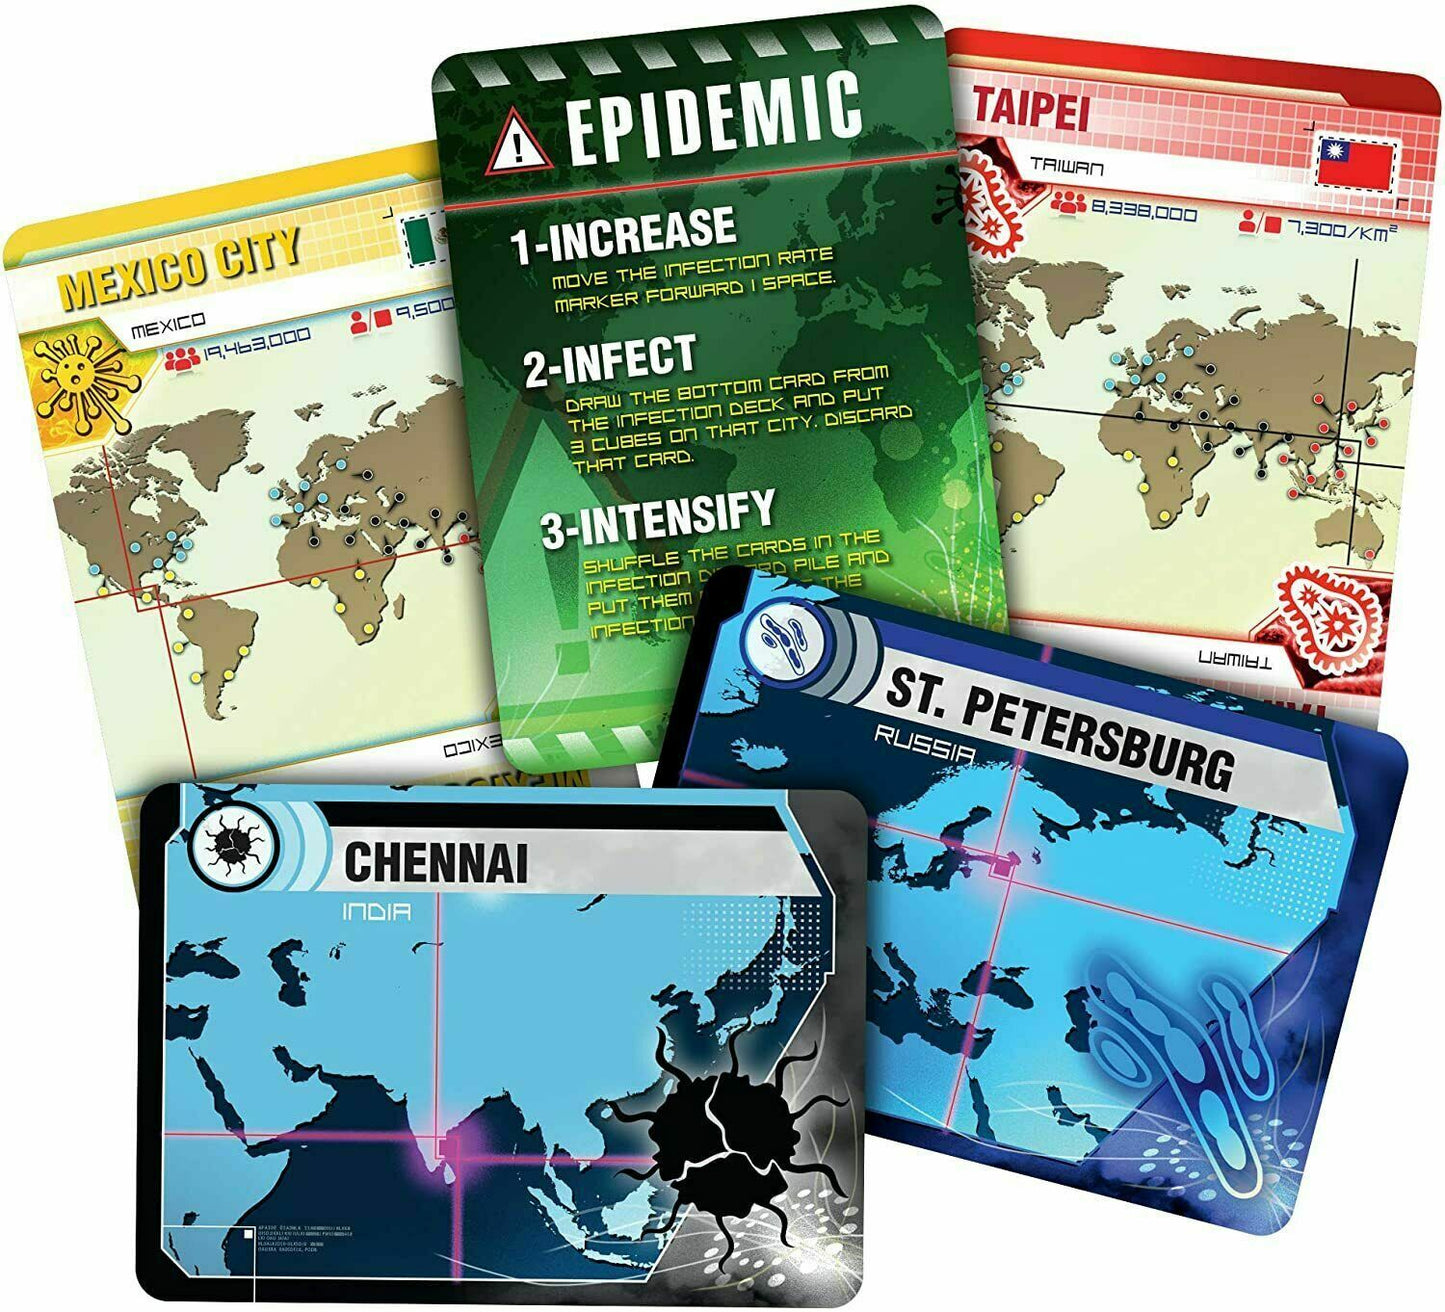 Pandemic Board Game (Base Game) | Family Board Game | Made by Z-Man Games